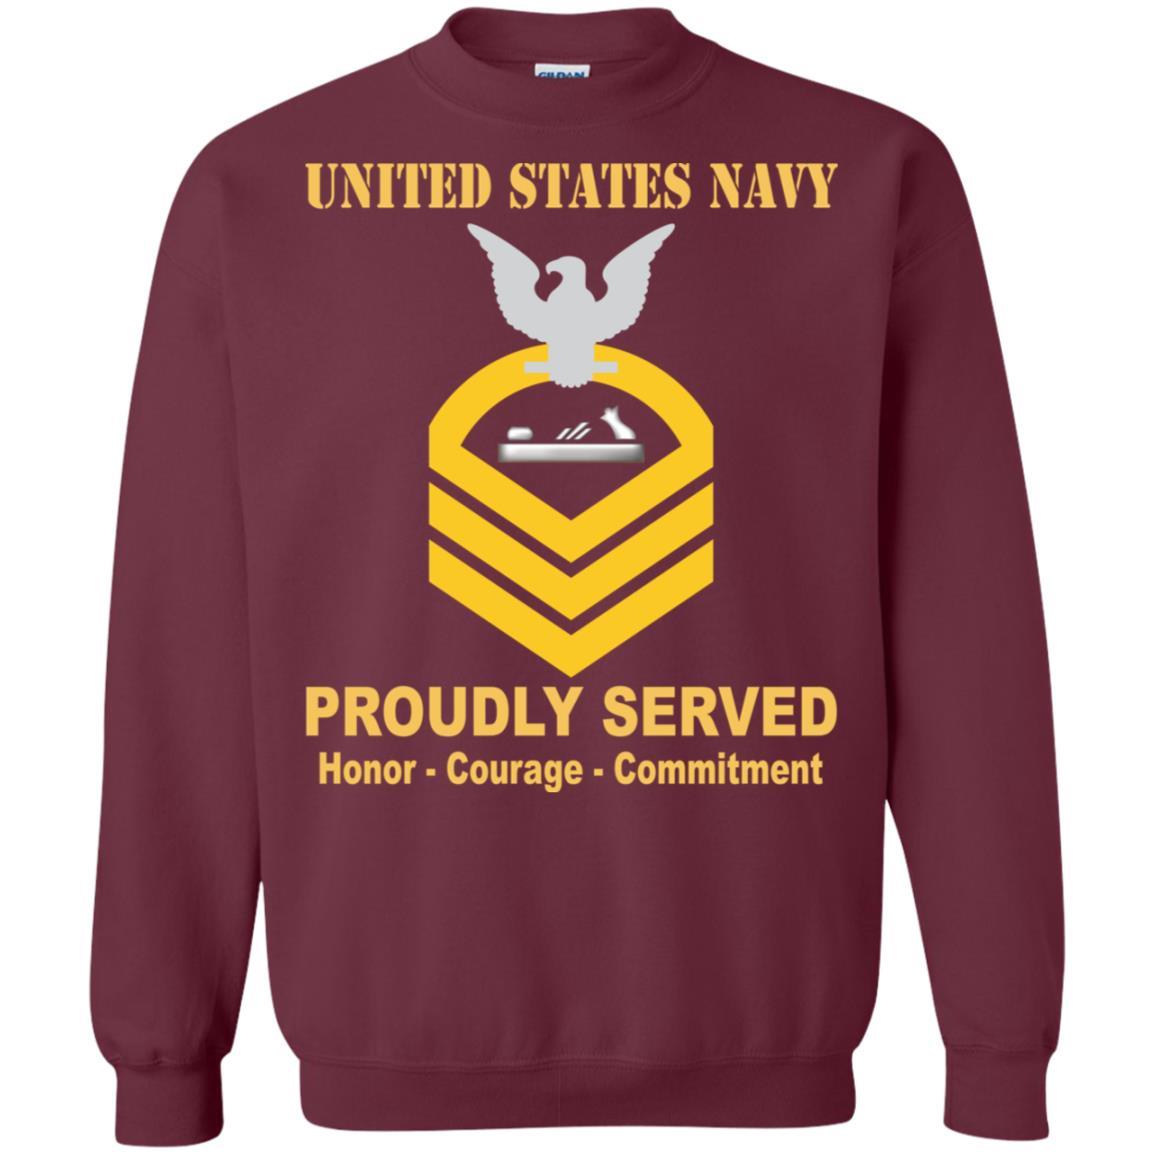 Navy Patternmaker Navy PM E-7 Rating Badges Proudly Served T-Shirt For Men On Front-TShirt-Navy-Veterans Nation